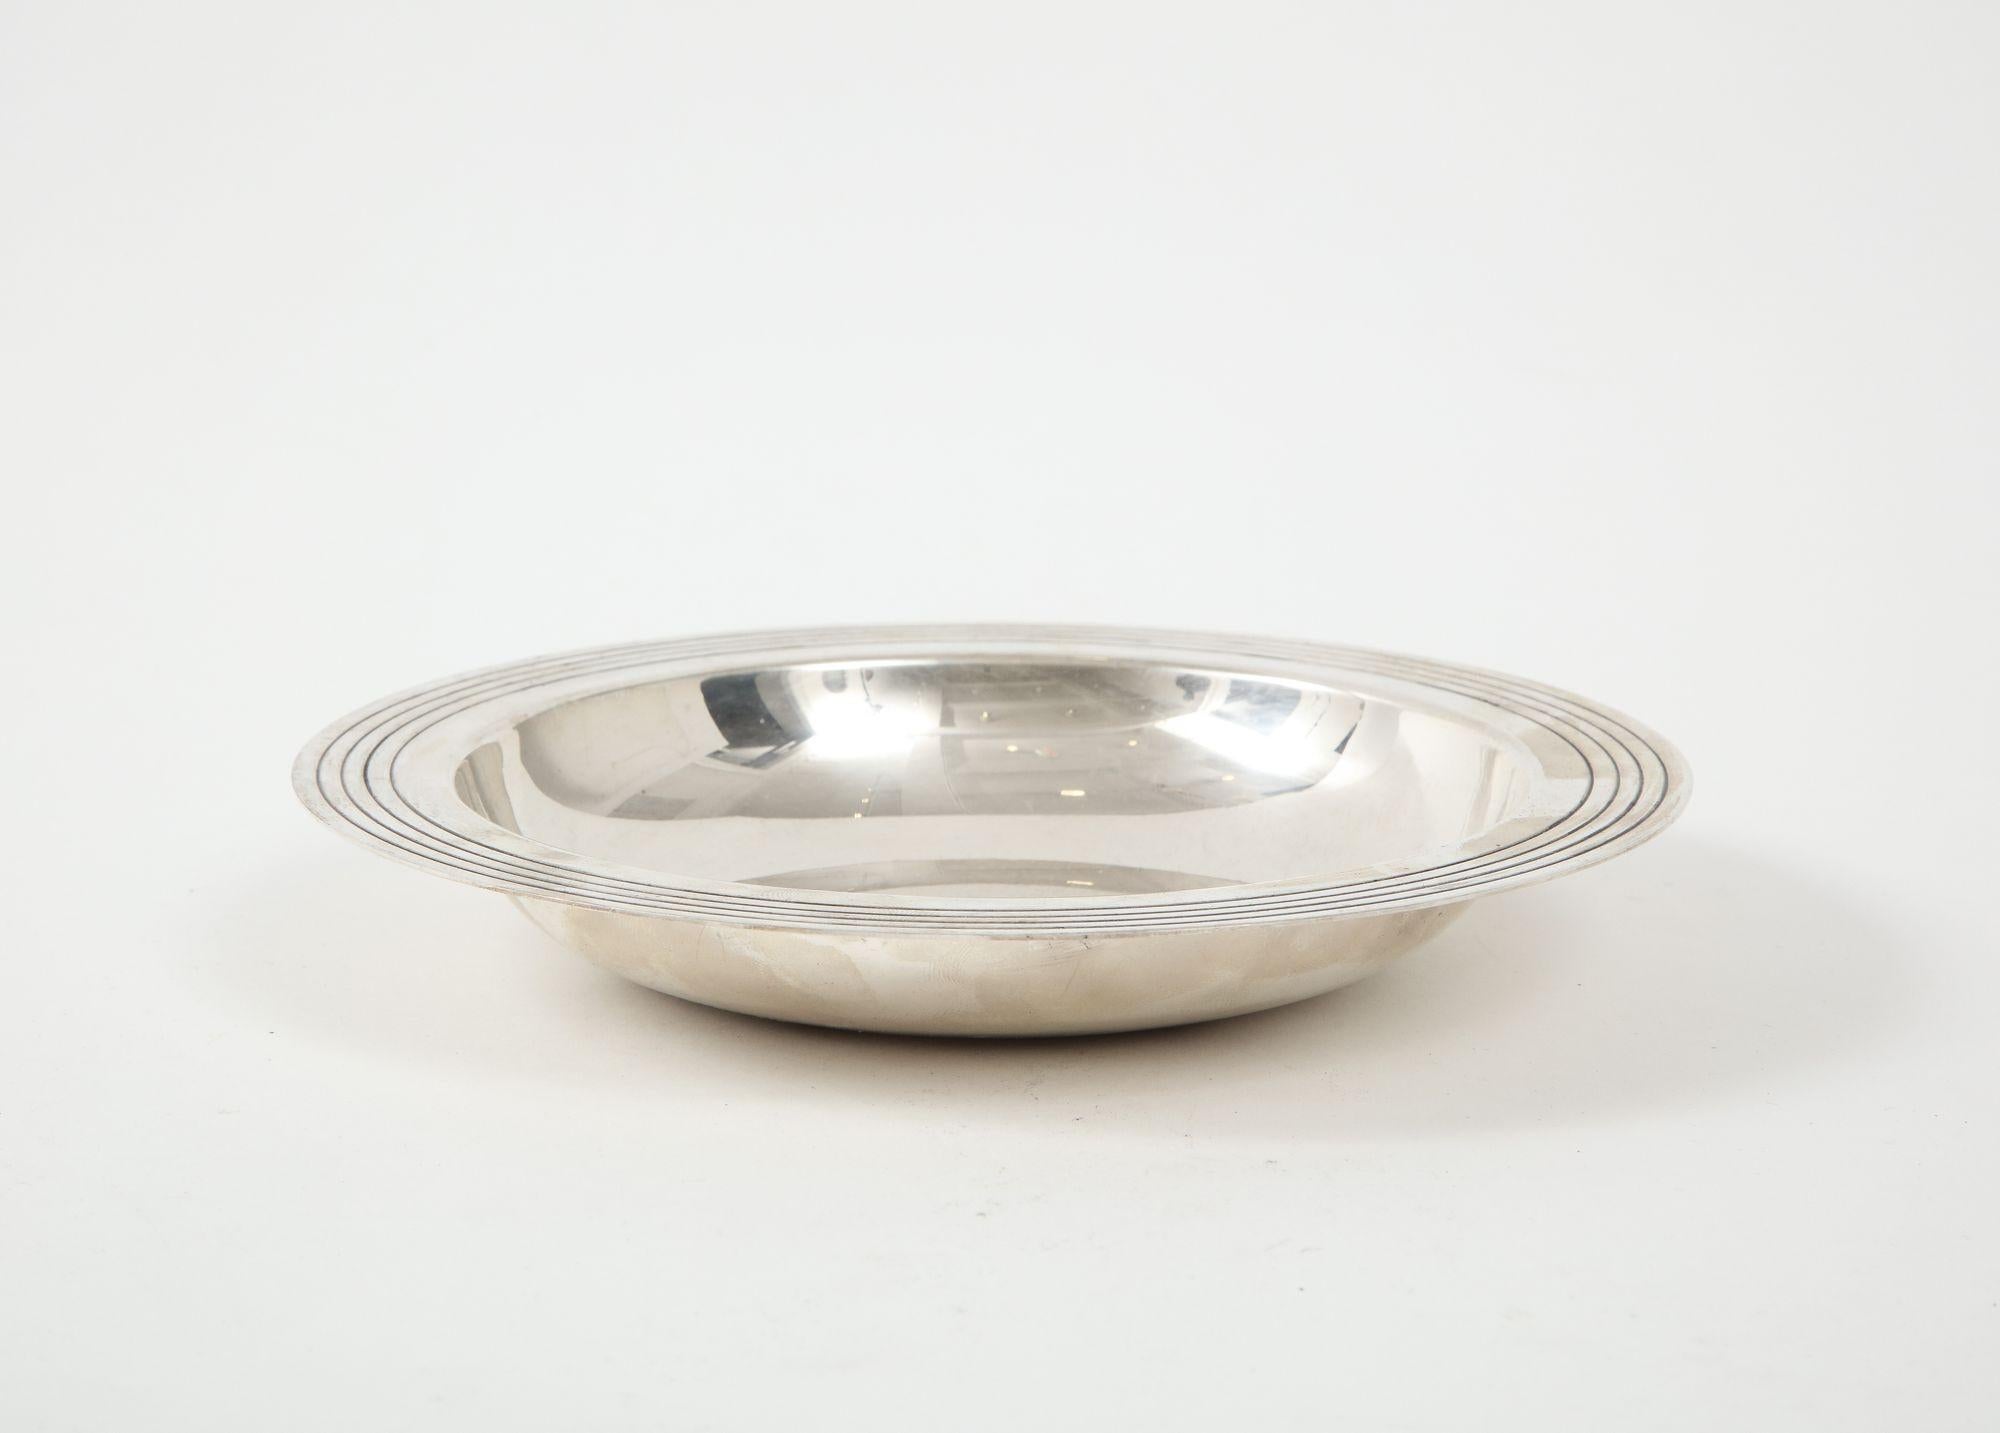 A wonderful signed streamlined Tiffany & Co. sterling silver Art Deco bowl.